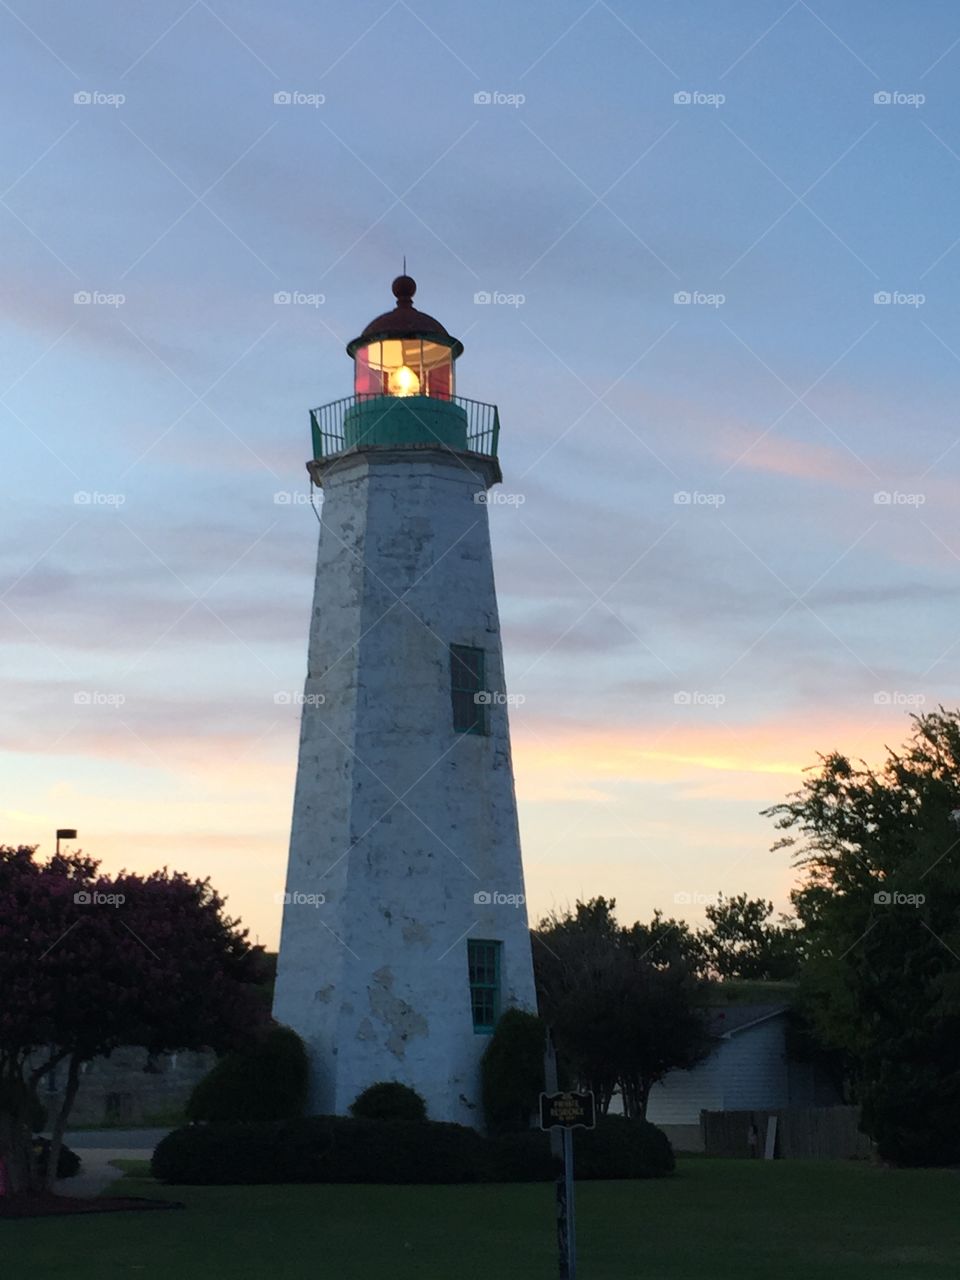 Old Point Comfort Lighthouse. The light still burns at one of the oldest lighthouses in the U.S.  At the setting of the sun it's light shines to all. 